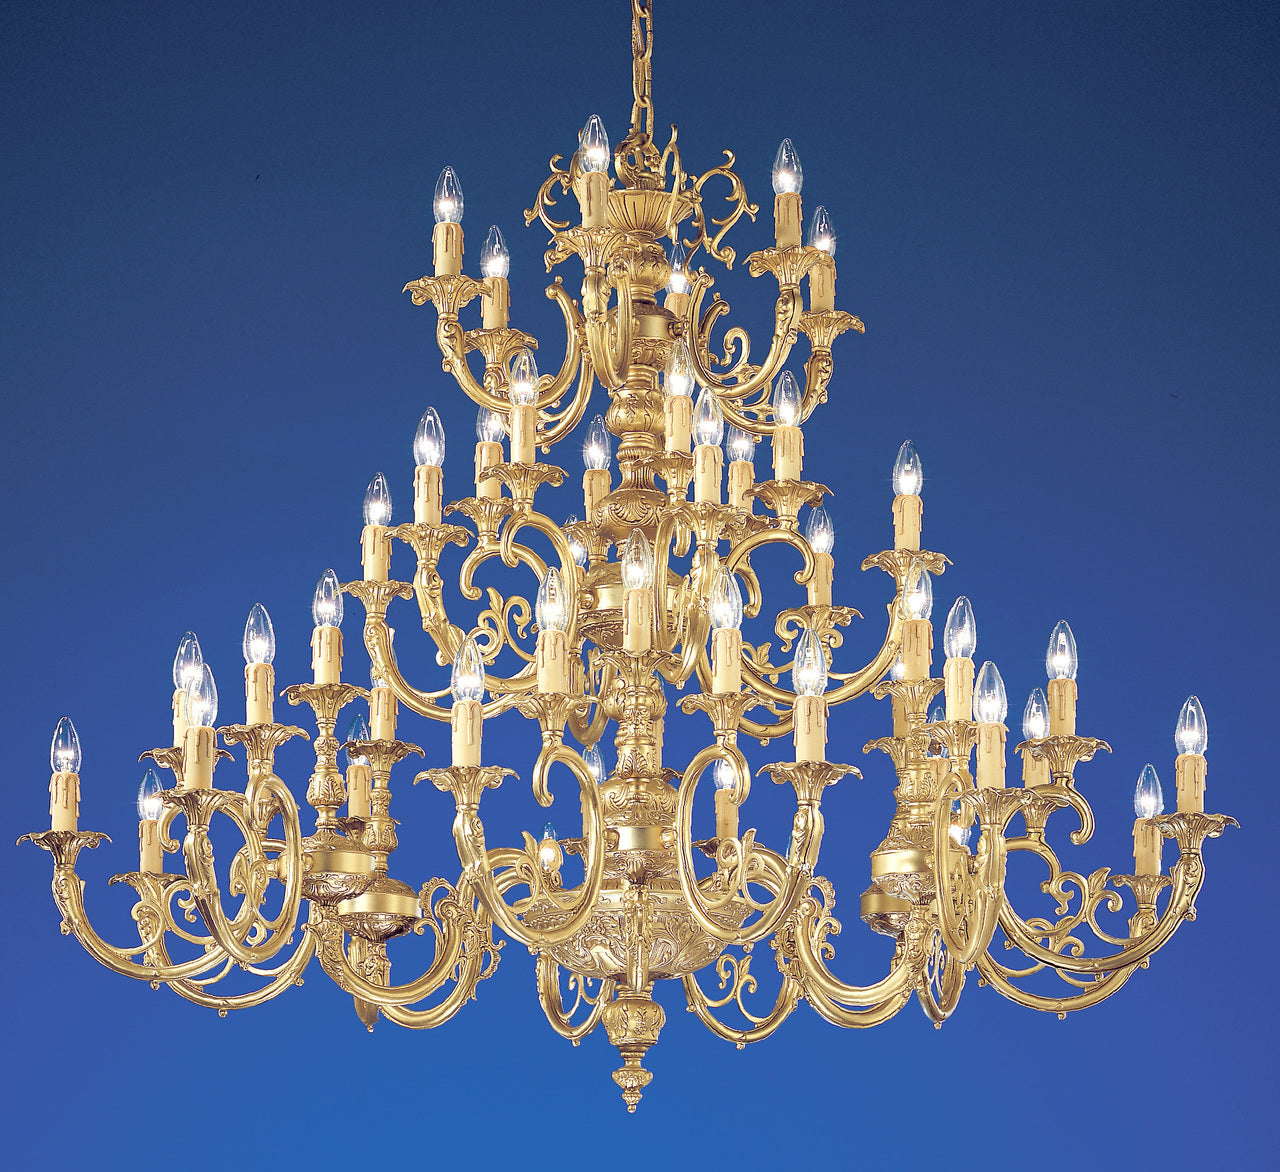 Classic Lighting 5748 SBB C Princeton Crystal/Cast Brass Chandelier in Satin Bronze/Brown Patina (Imported from Spain)